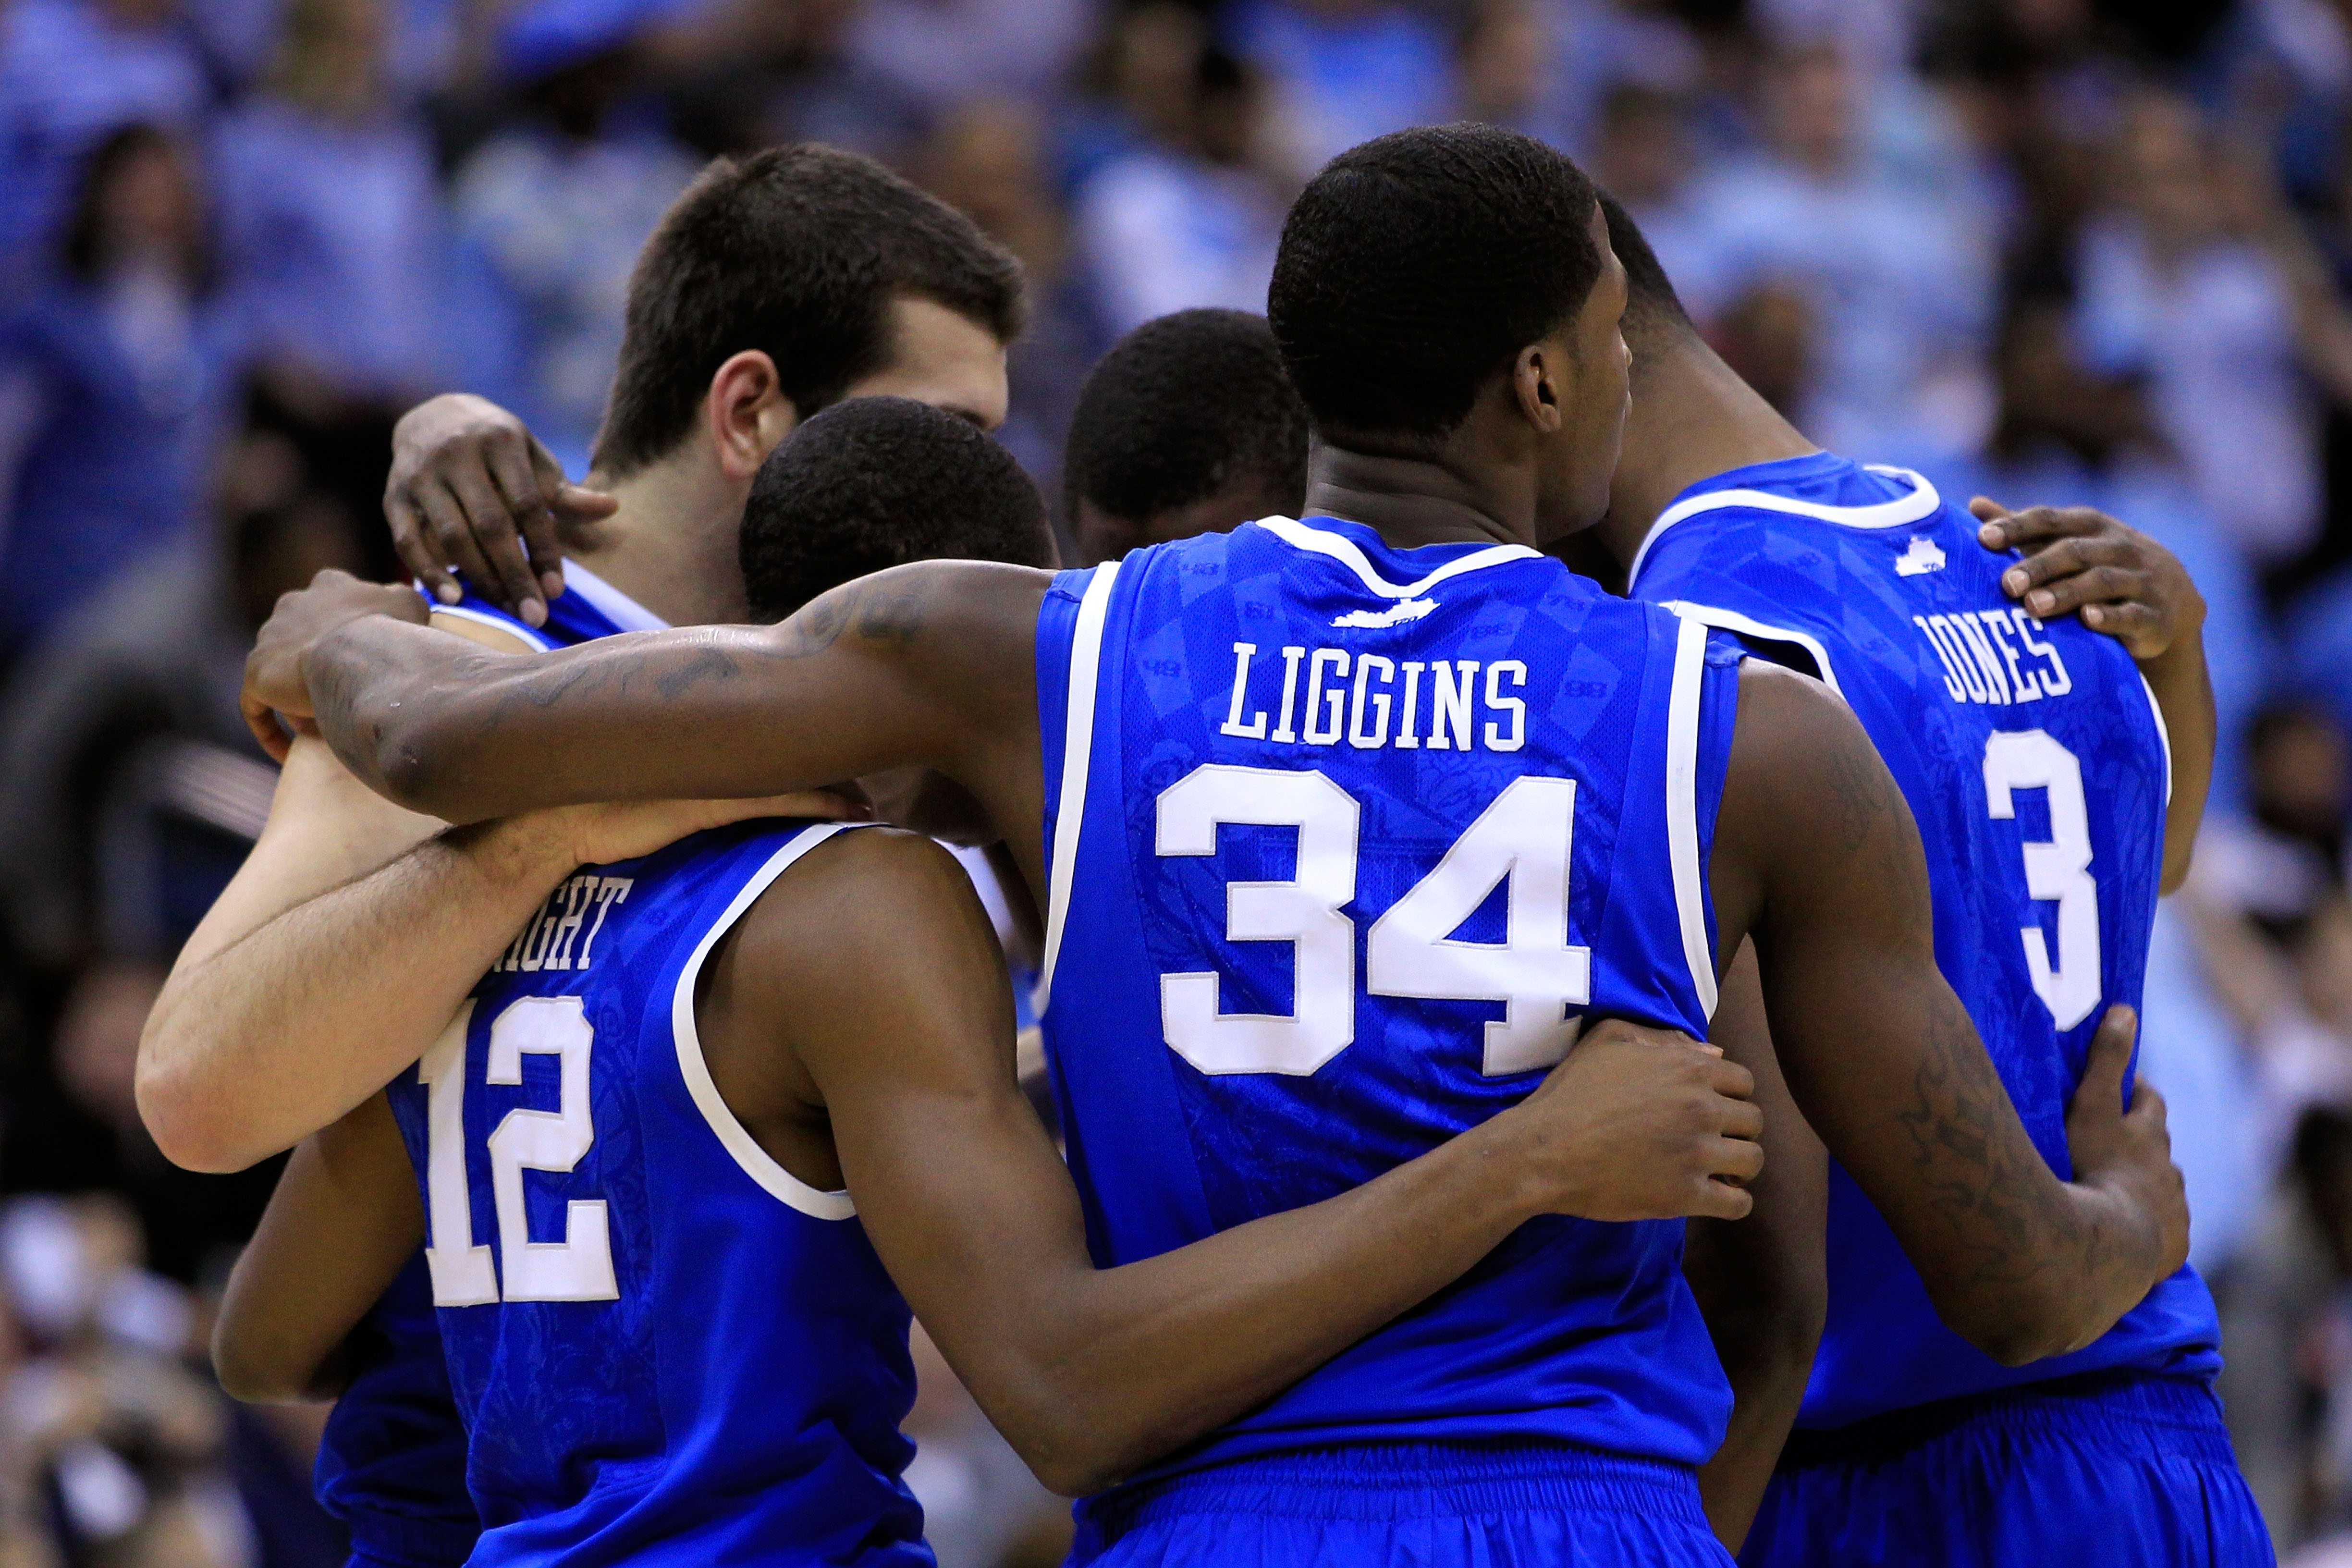 NEWARK, NJ - MARCH 27:  DeAndre Liggins #34 of the Kentucky Wildcats hugs teammates Brandon Knight #12 and Terrence Jones #3 during their game against the North Carolina Tar Heels in the east regional final of the 2011 NCAA men's basketball tournament at